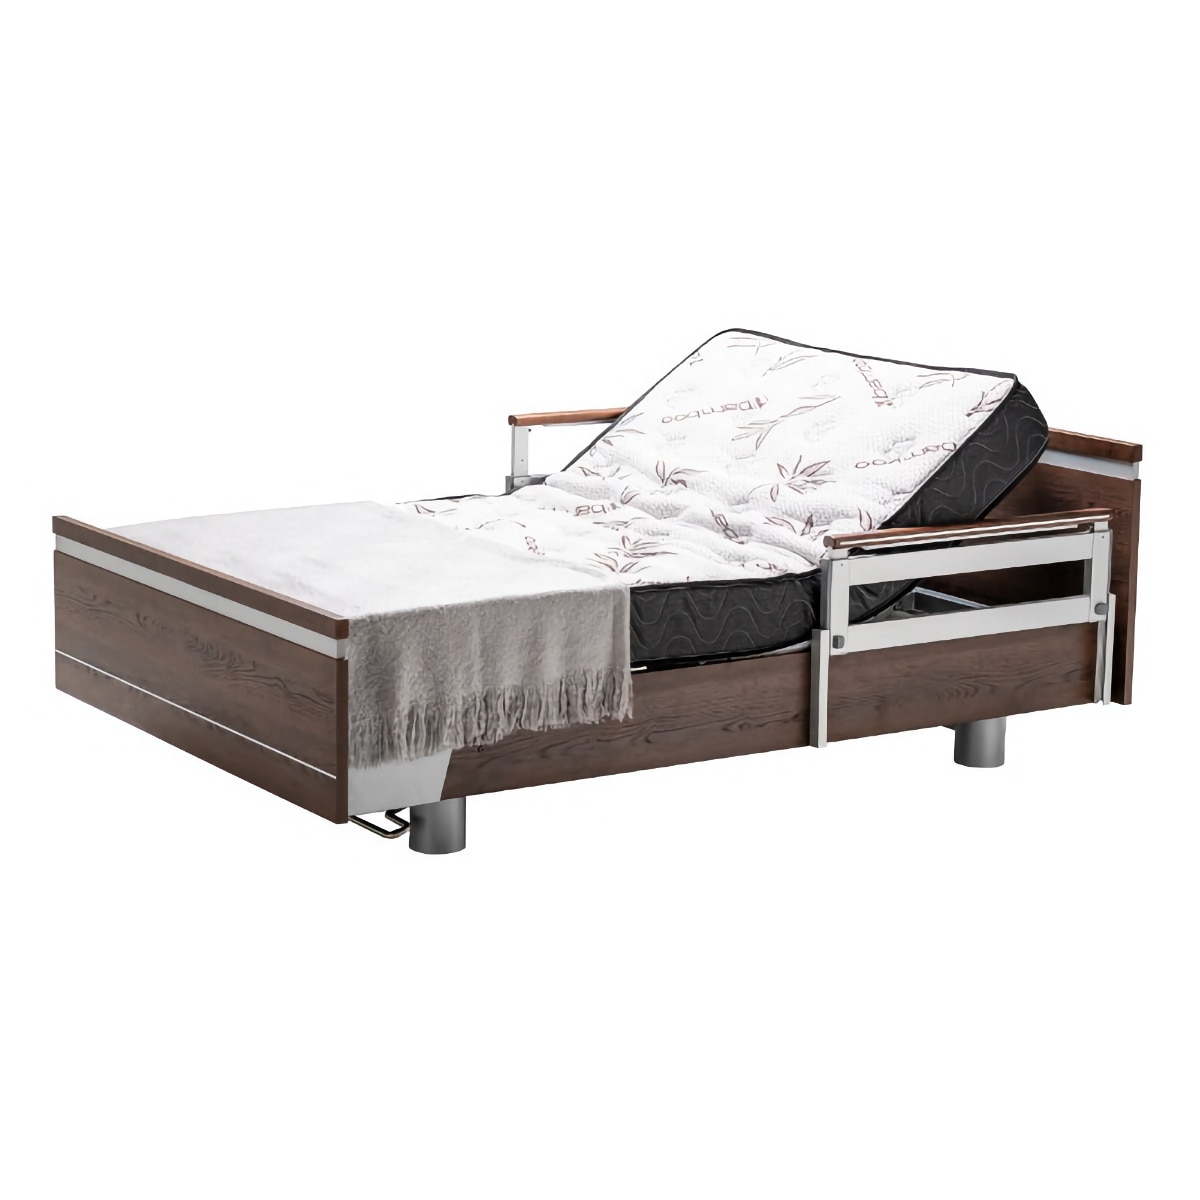 SonderCare Aura hospital bed extra wide with wood bed frame